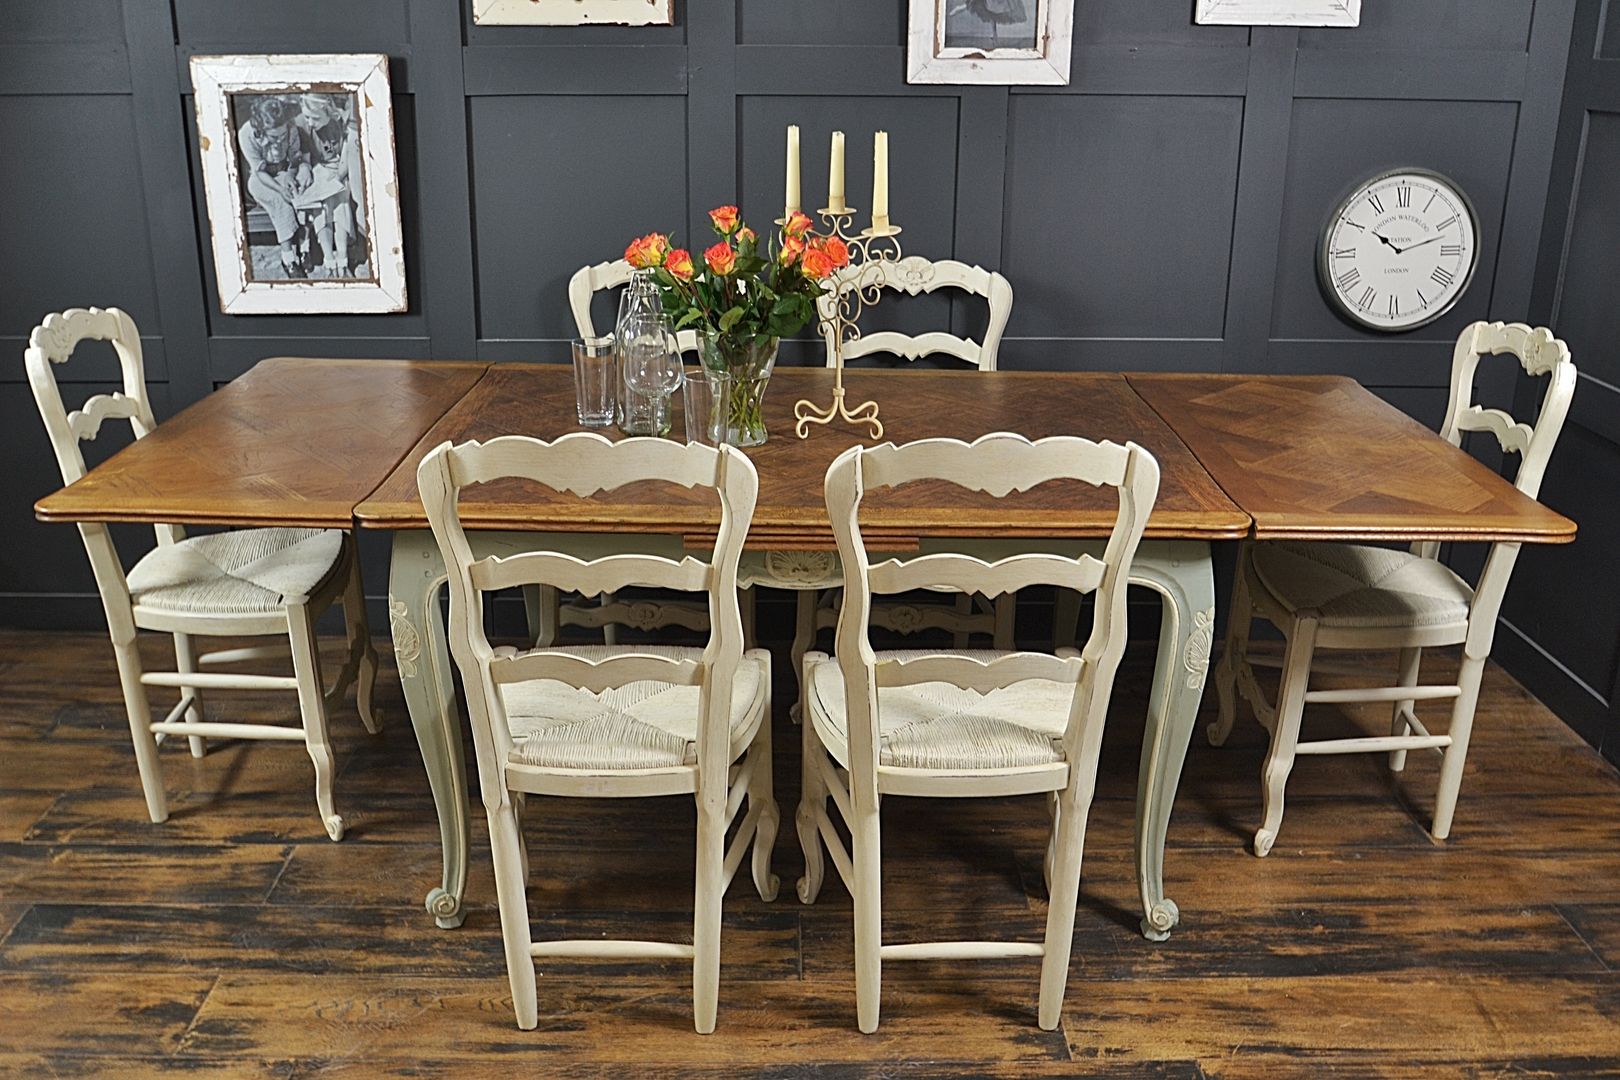 Shabby Chic French Oak Dining Table with 6 Chairs in Rococo, The Treasure Trove Shabby Chic & Vintage Furniture The Treasure Trove Shabby Chic & Vintage Furniture Klassieke eetkamers Tafels